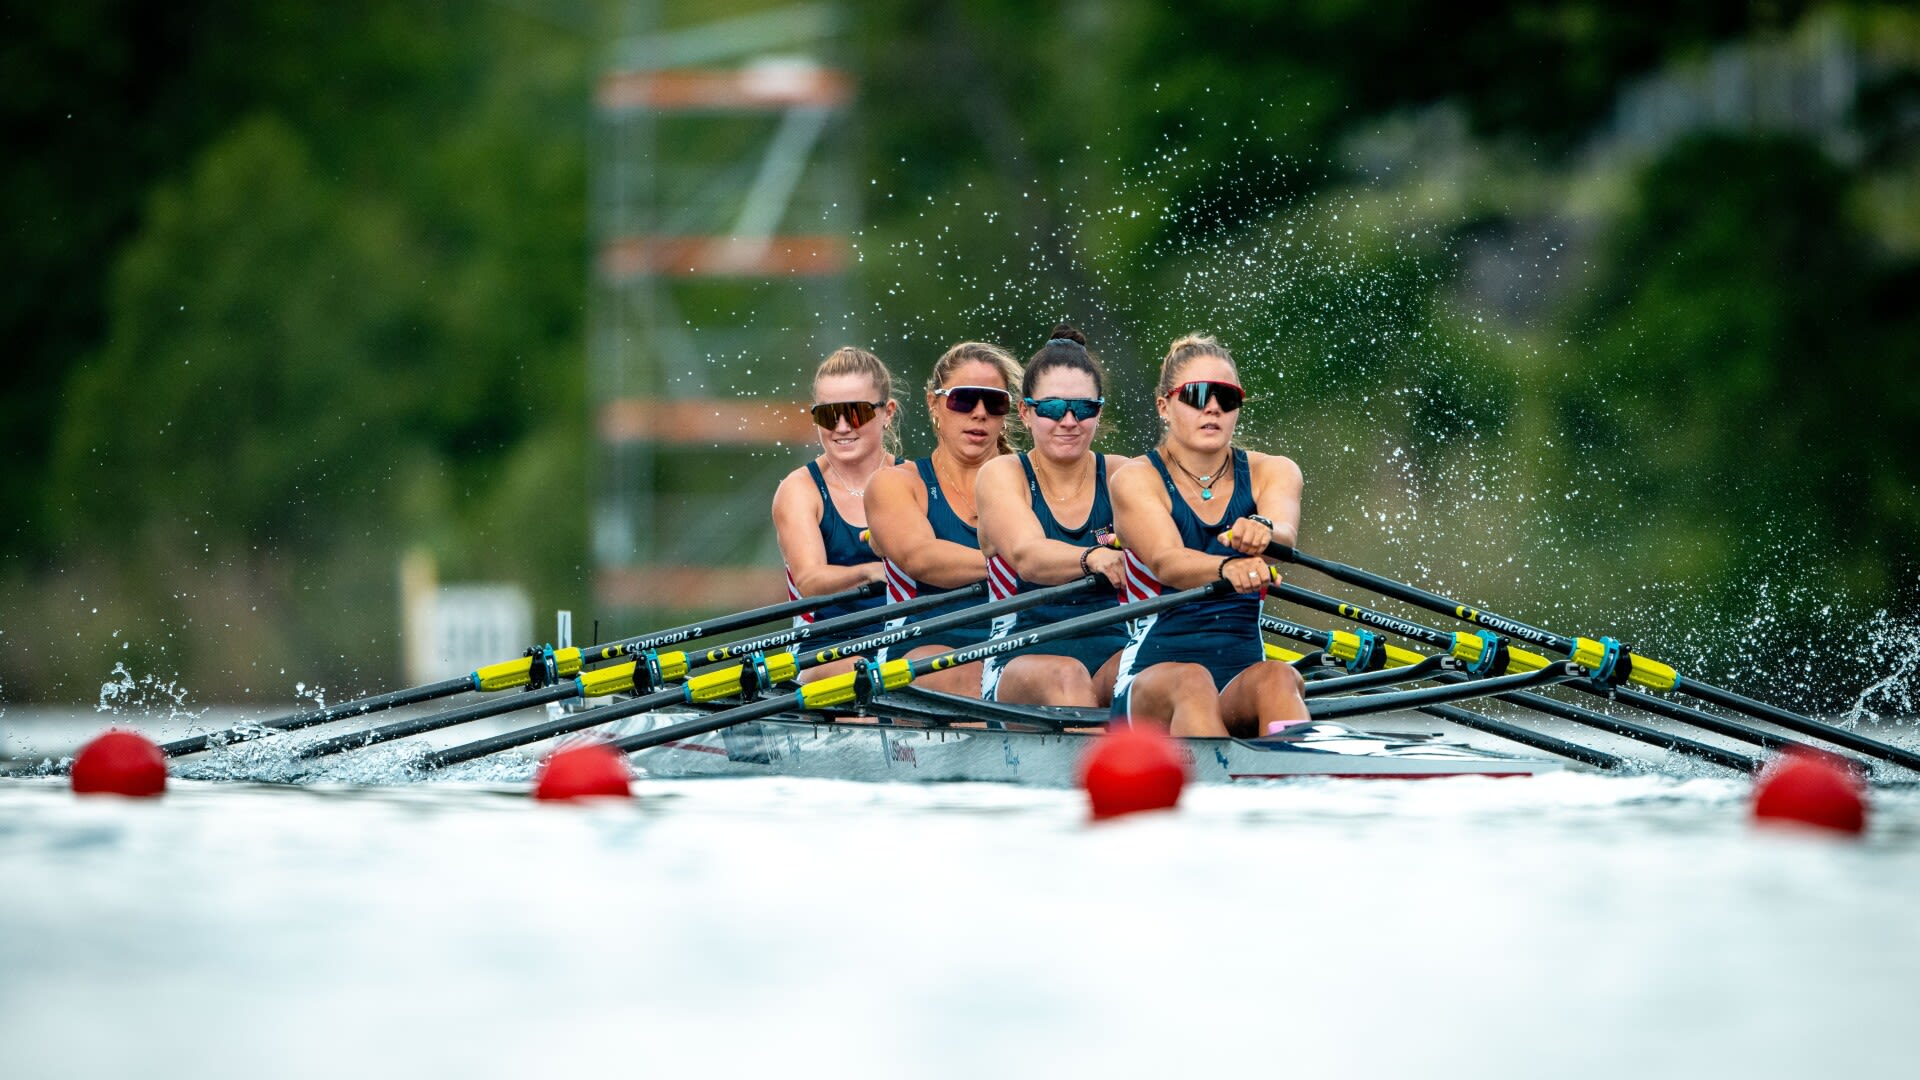 U.S. Olympic rowing team for Paris set at 42 athletes after final qualification regatta